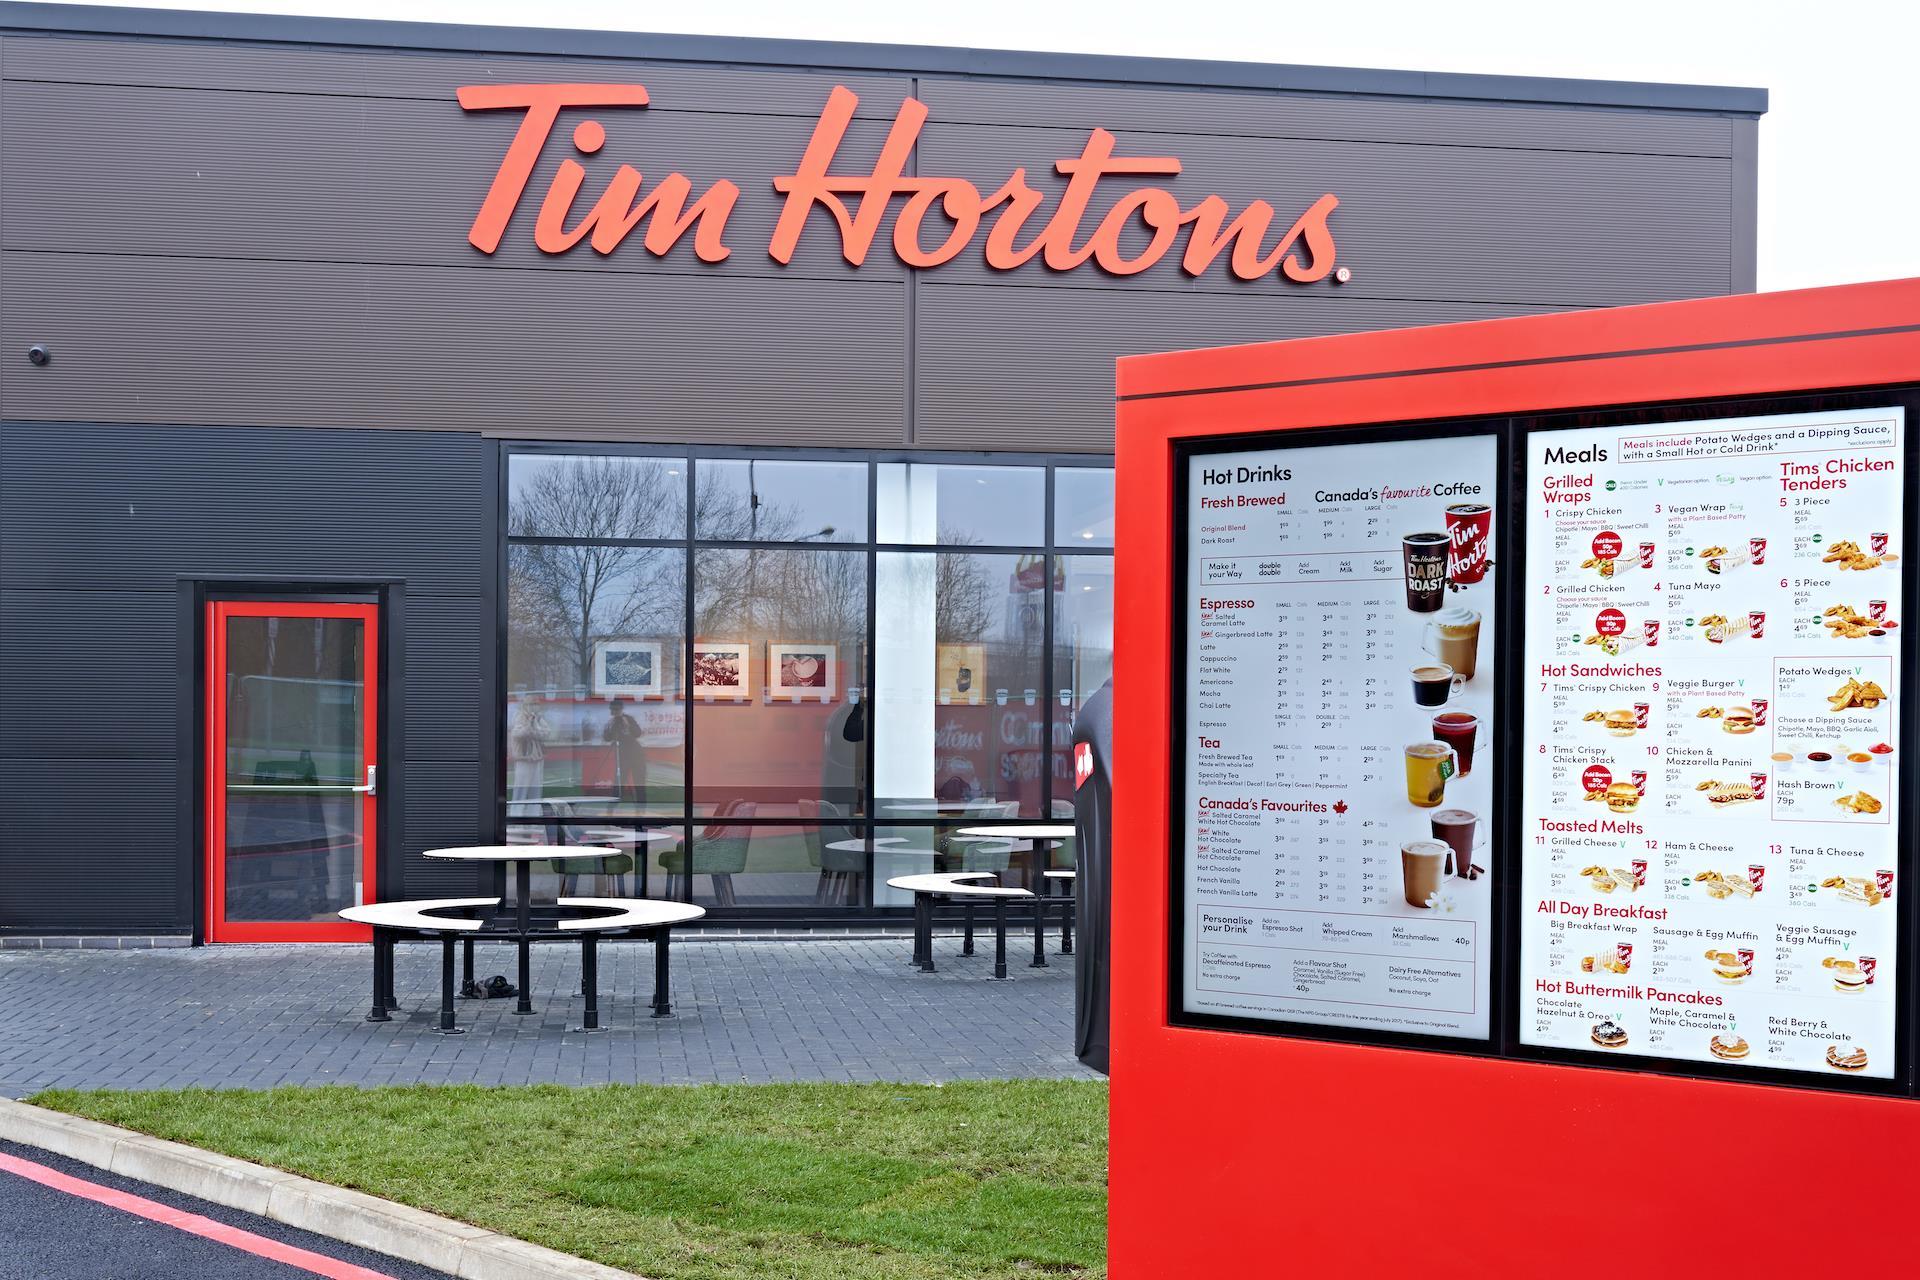 THE BIG INTERVIEW: Tim Hortons UK boss Kevin Hydes on why